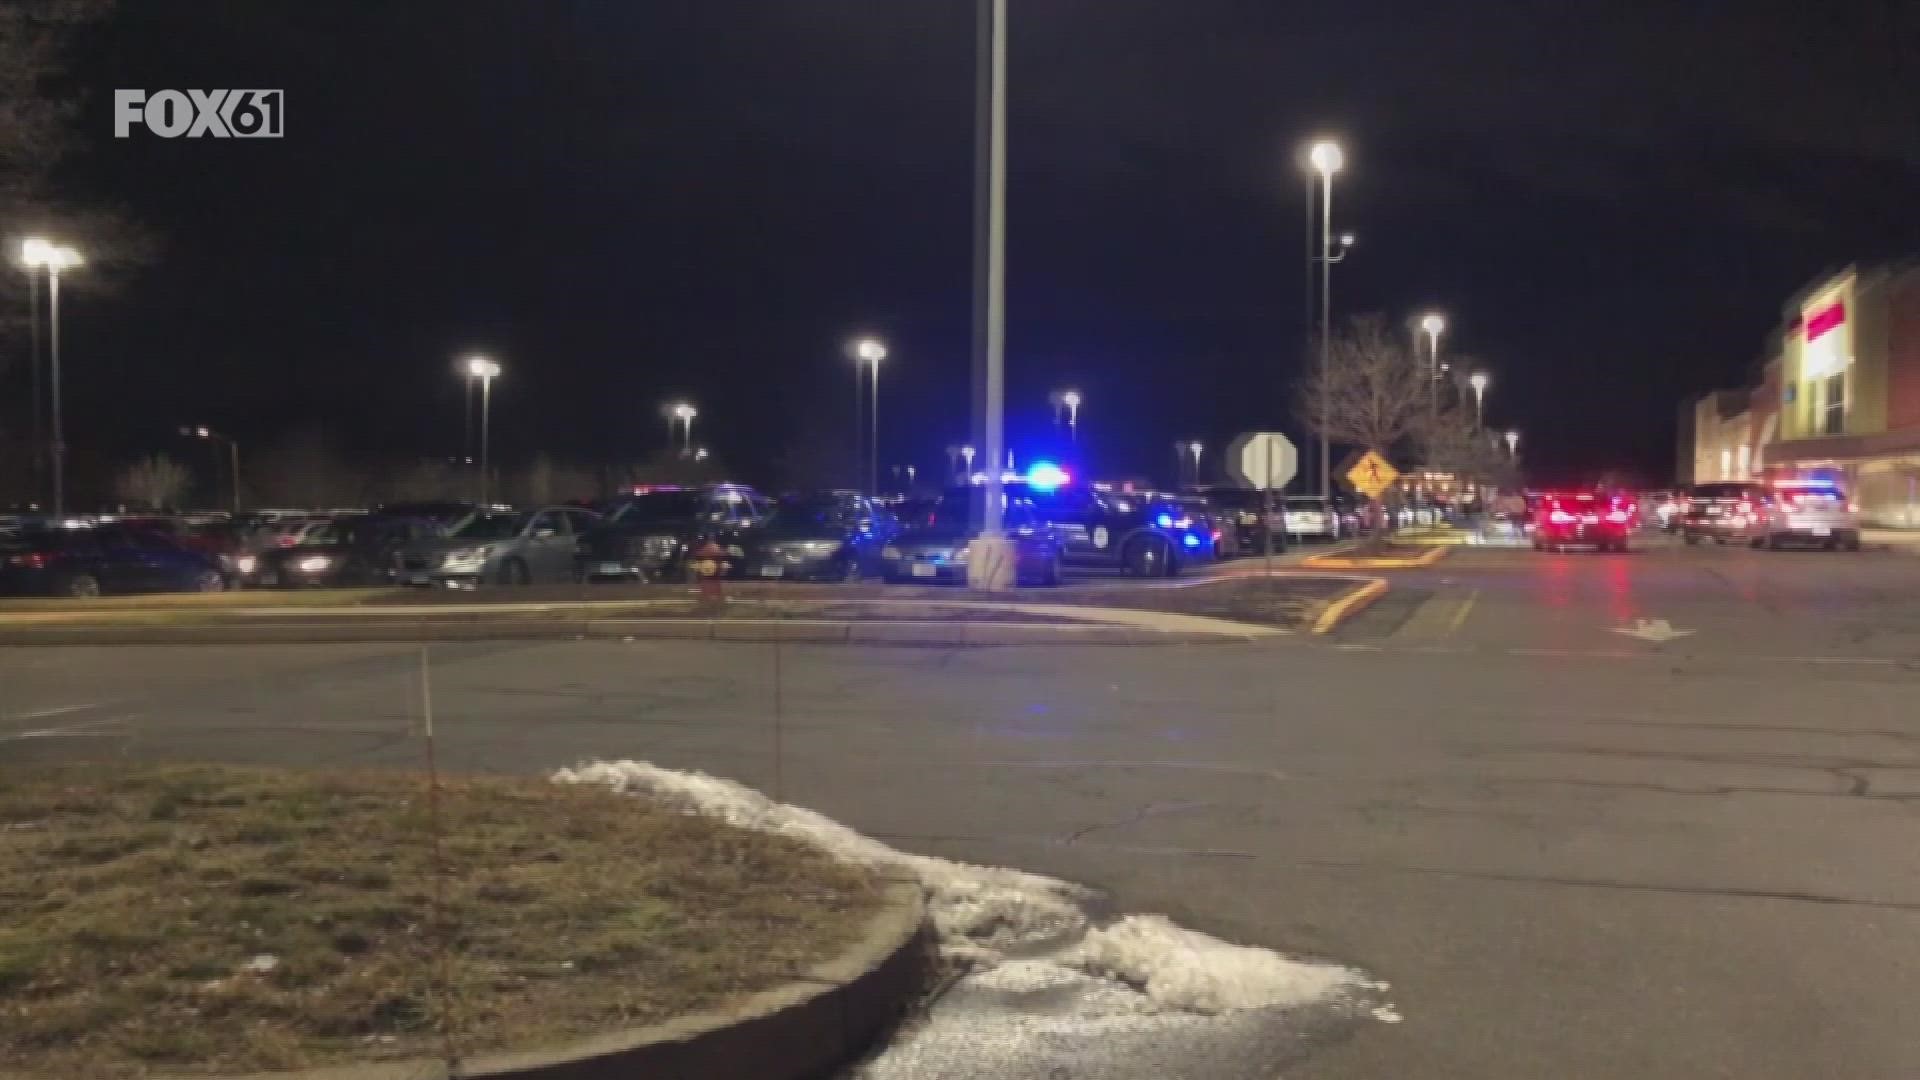 Theater staff called police to the scene for a "disturbance caused by a large number of teens," police said.